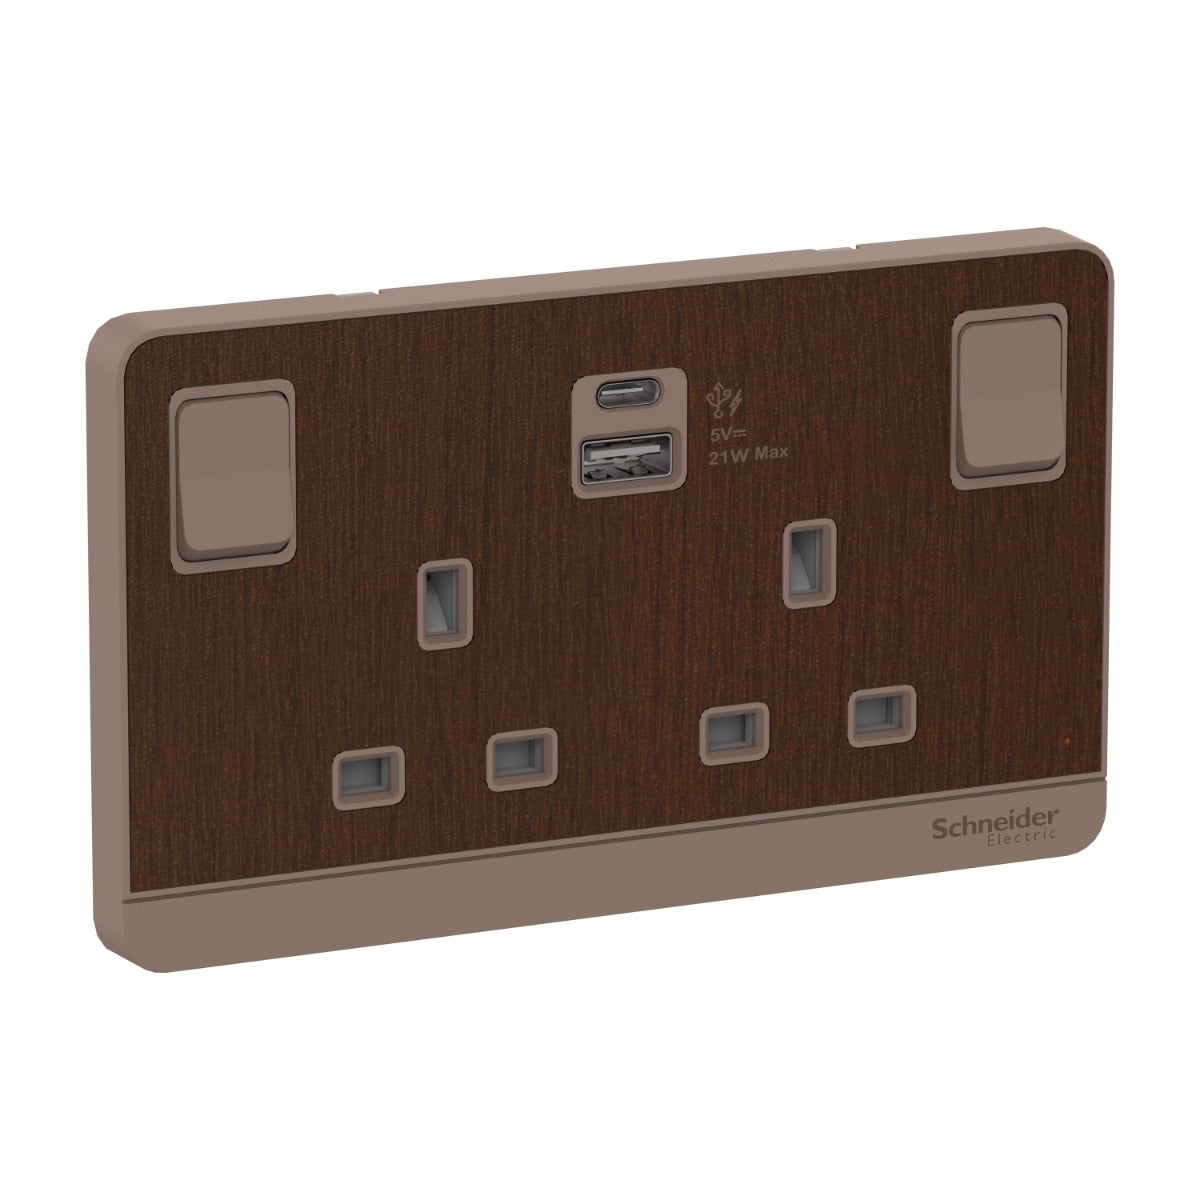 AvatarOn 13A 2 Gang Double Pole Switched Socket with 2 Gang USB Charger Socket Type A+C, Dark Wood